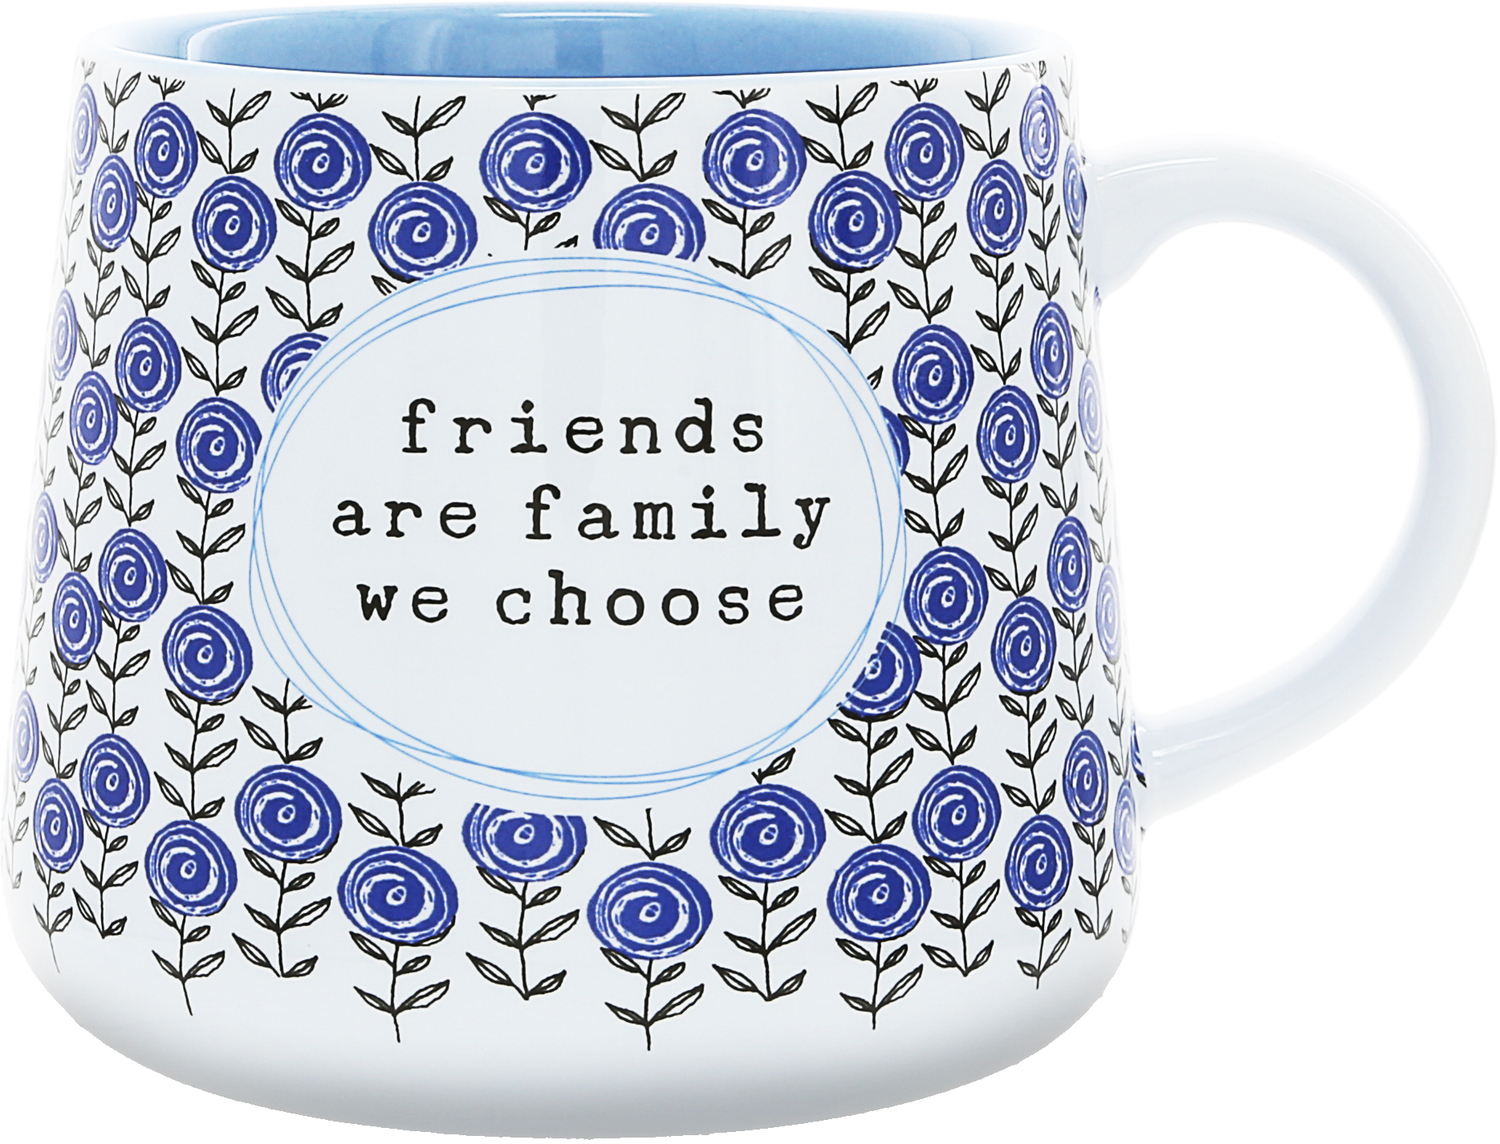 Friends Are Family by You Make Me Smile -ALW - Friends Are Family - 18 oz Mug